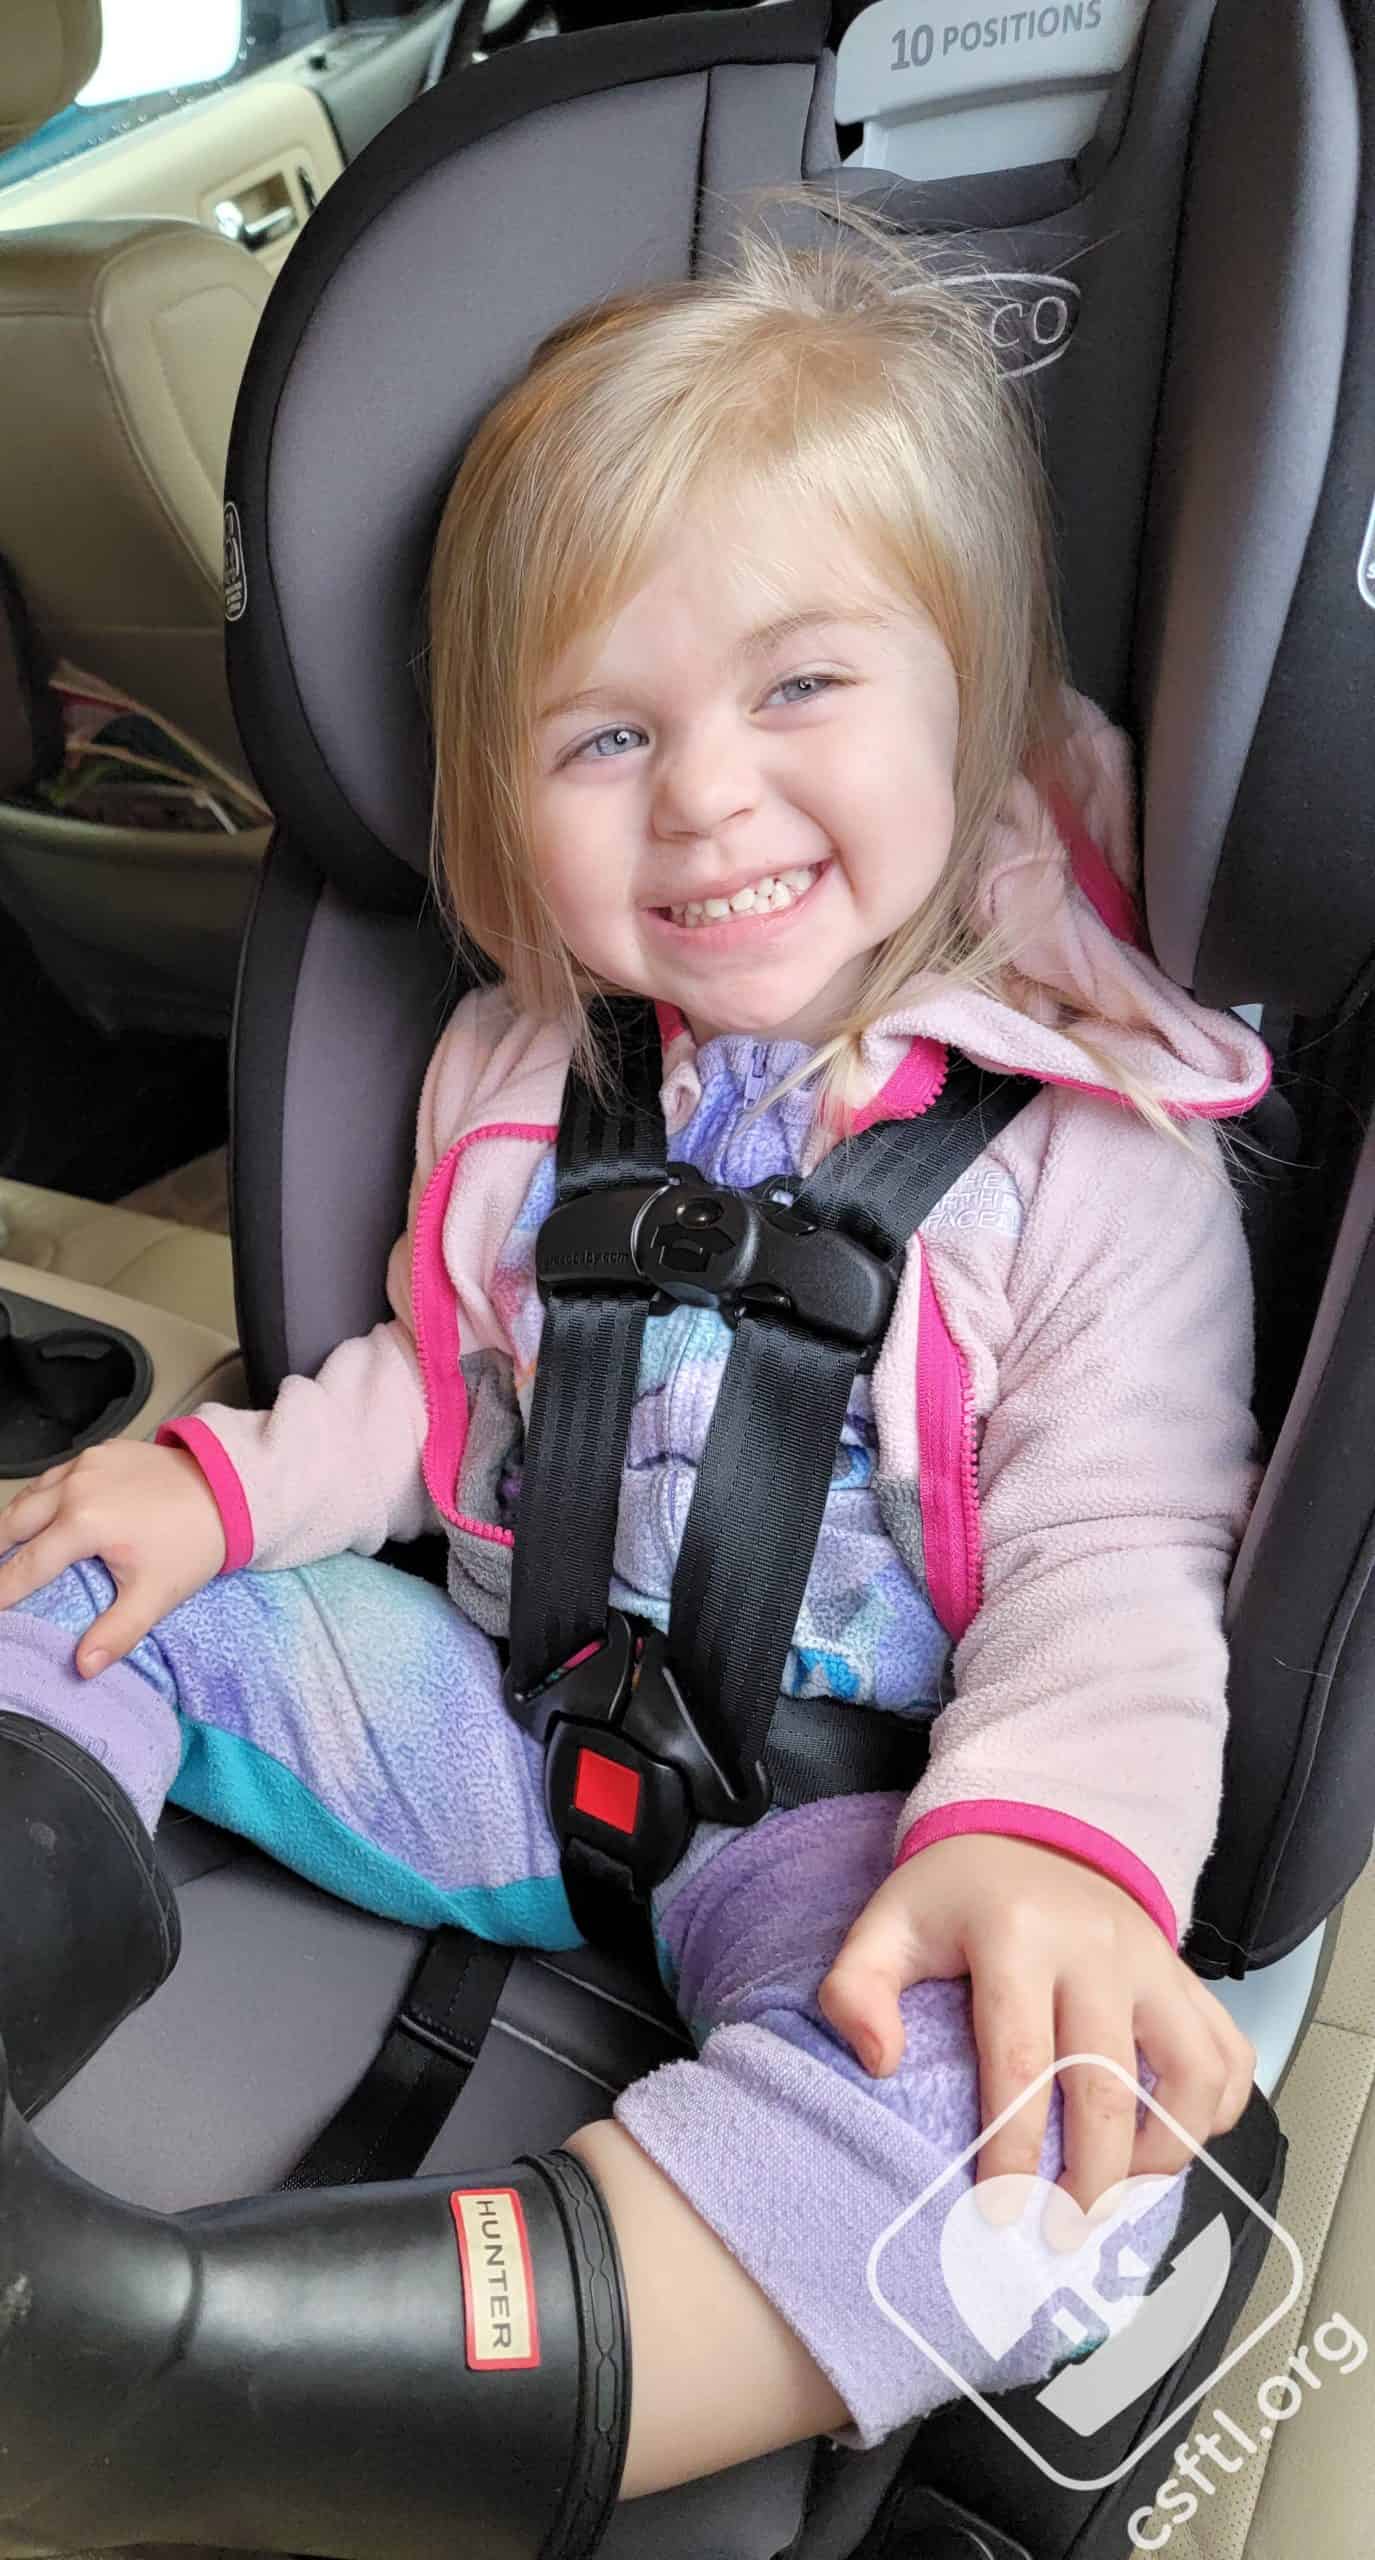 Child car seats: a matter of safety